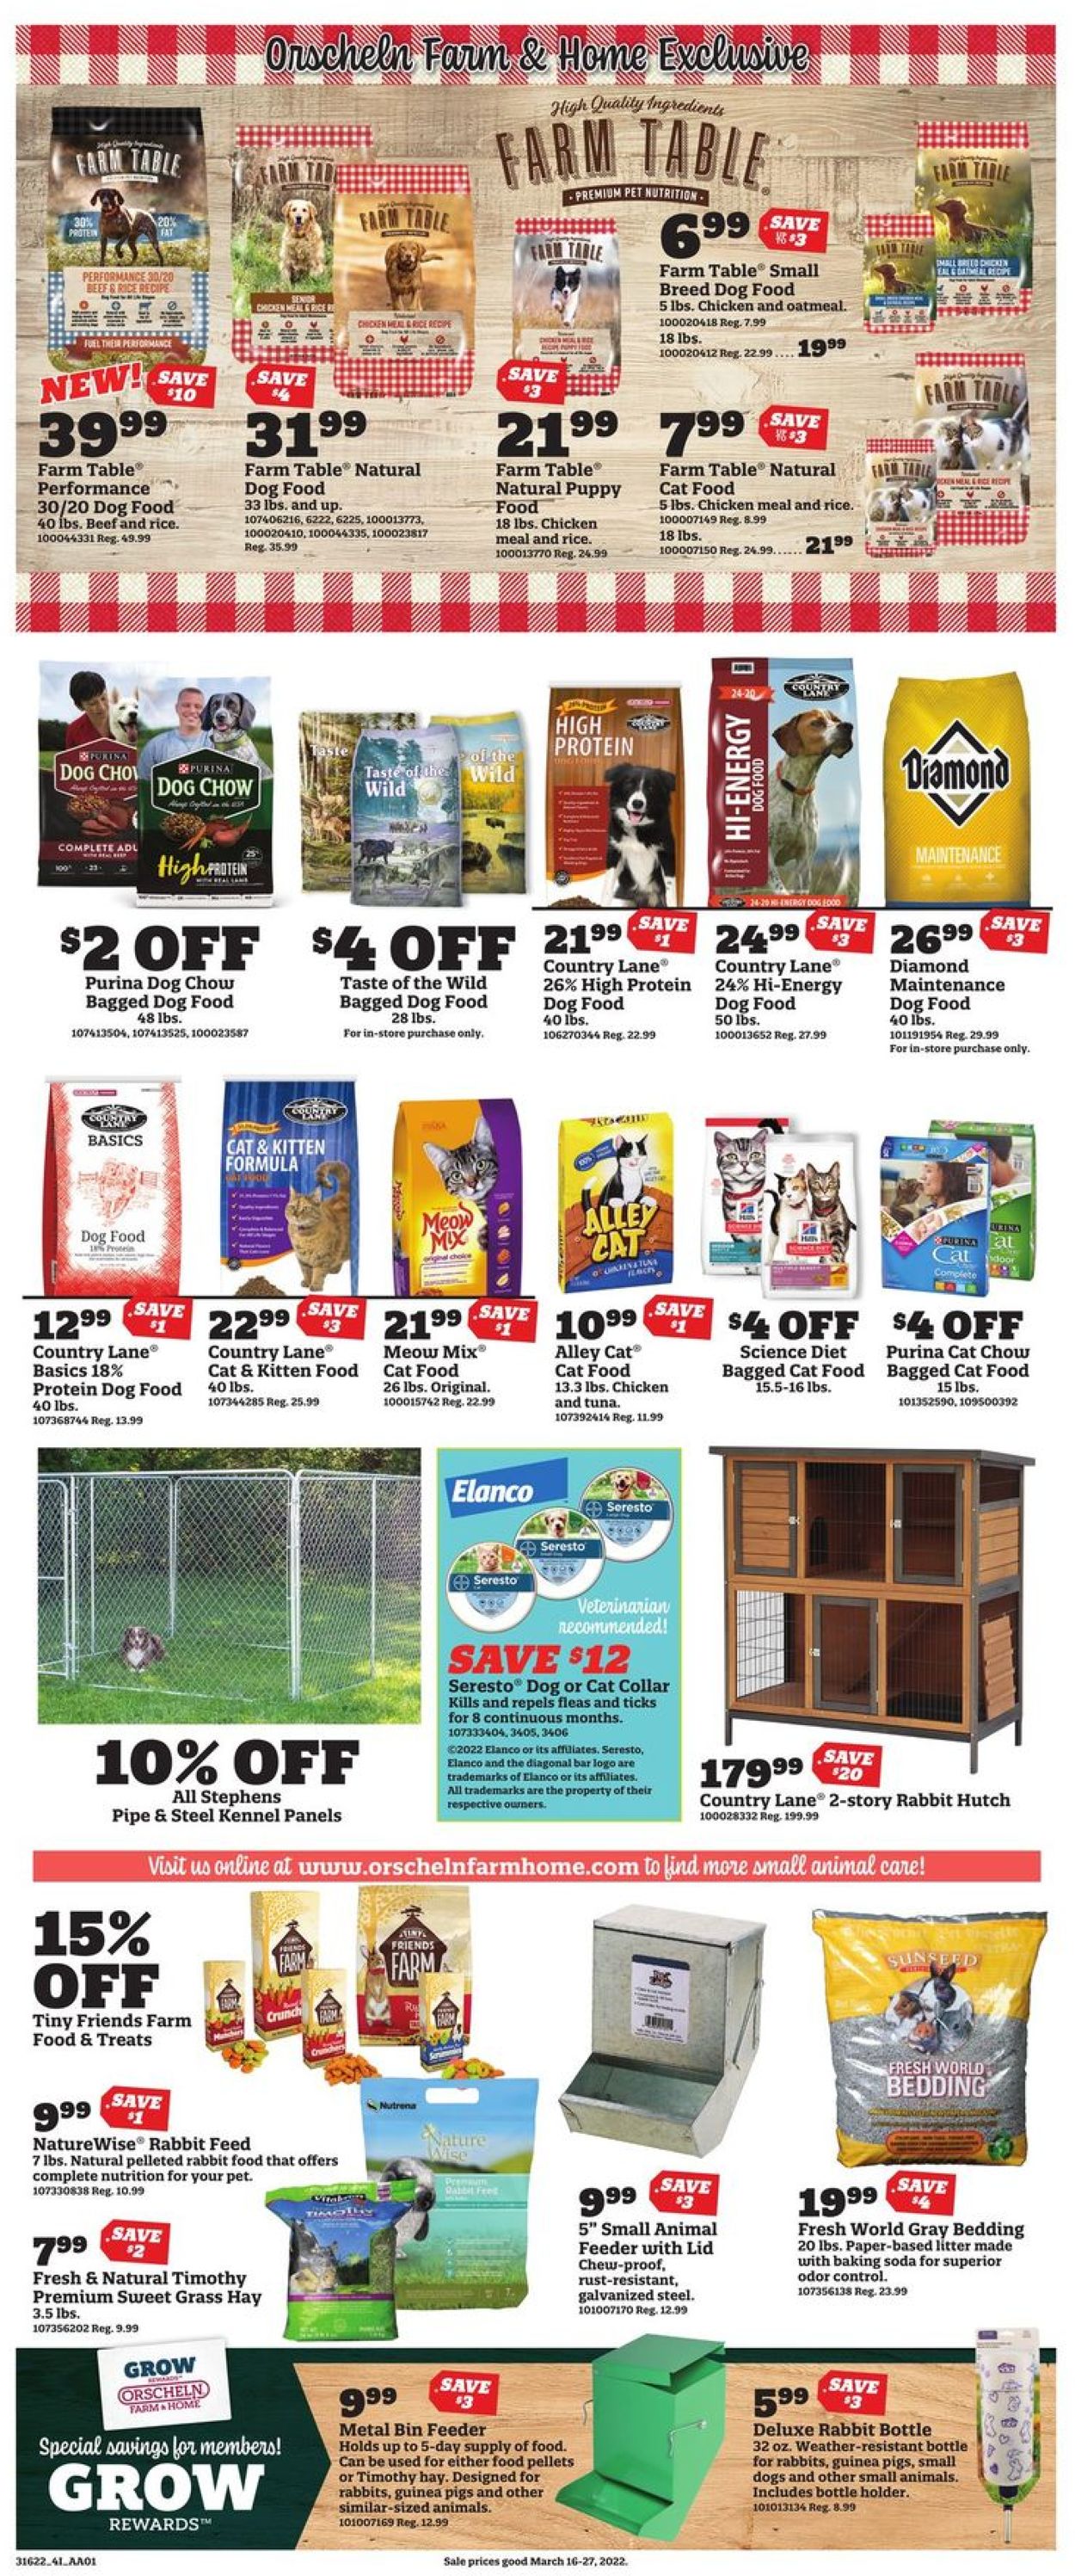 Orscheln Farm and Home Weekly Ad Circular - valid 03/16-03/27/2022 (Page 4)